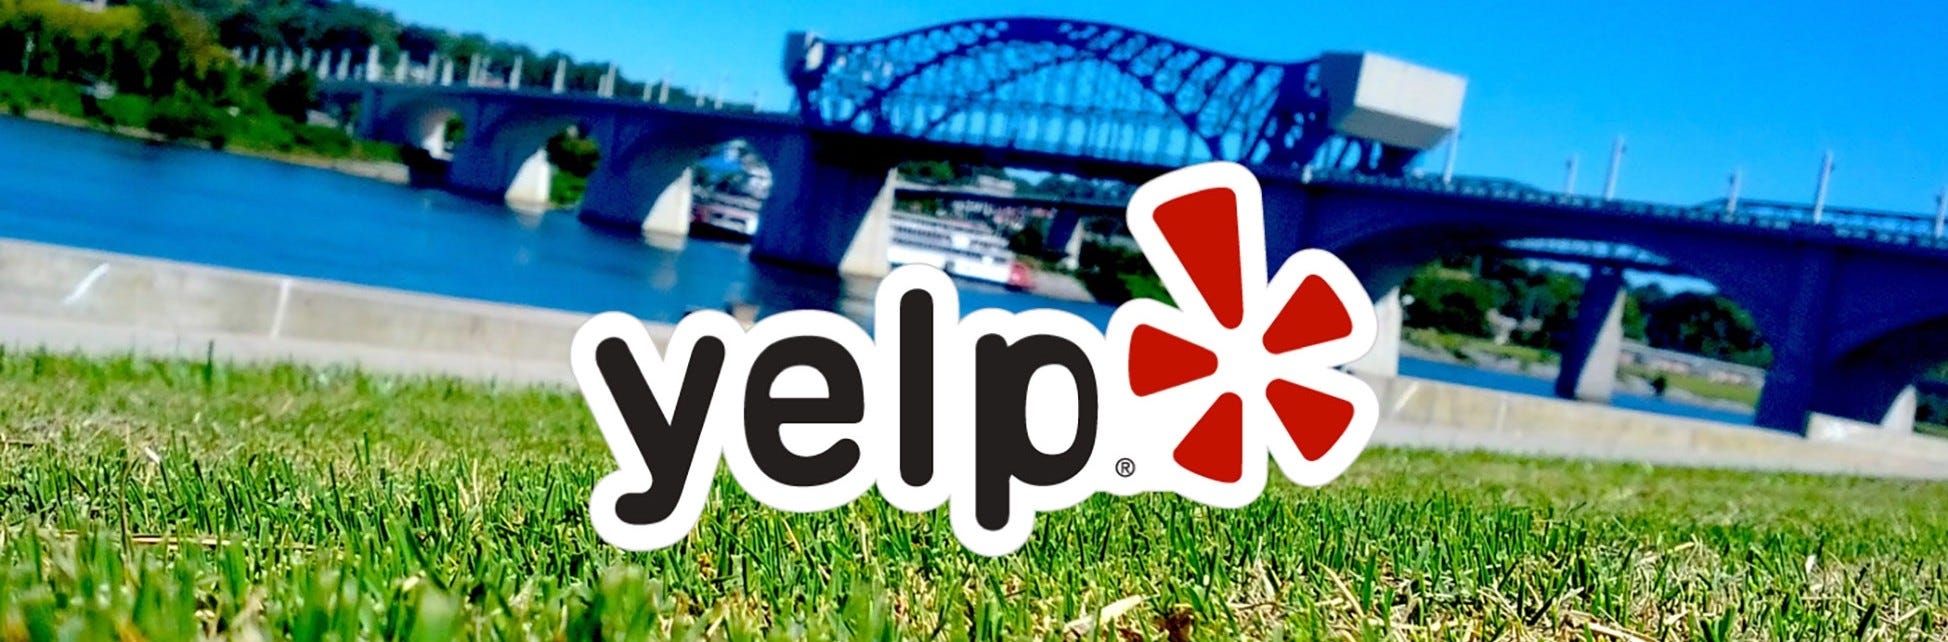 Yelp is Here to Help (Your Park)